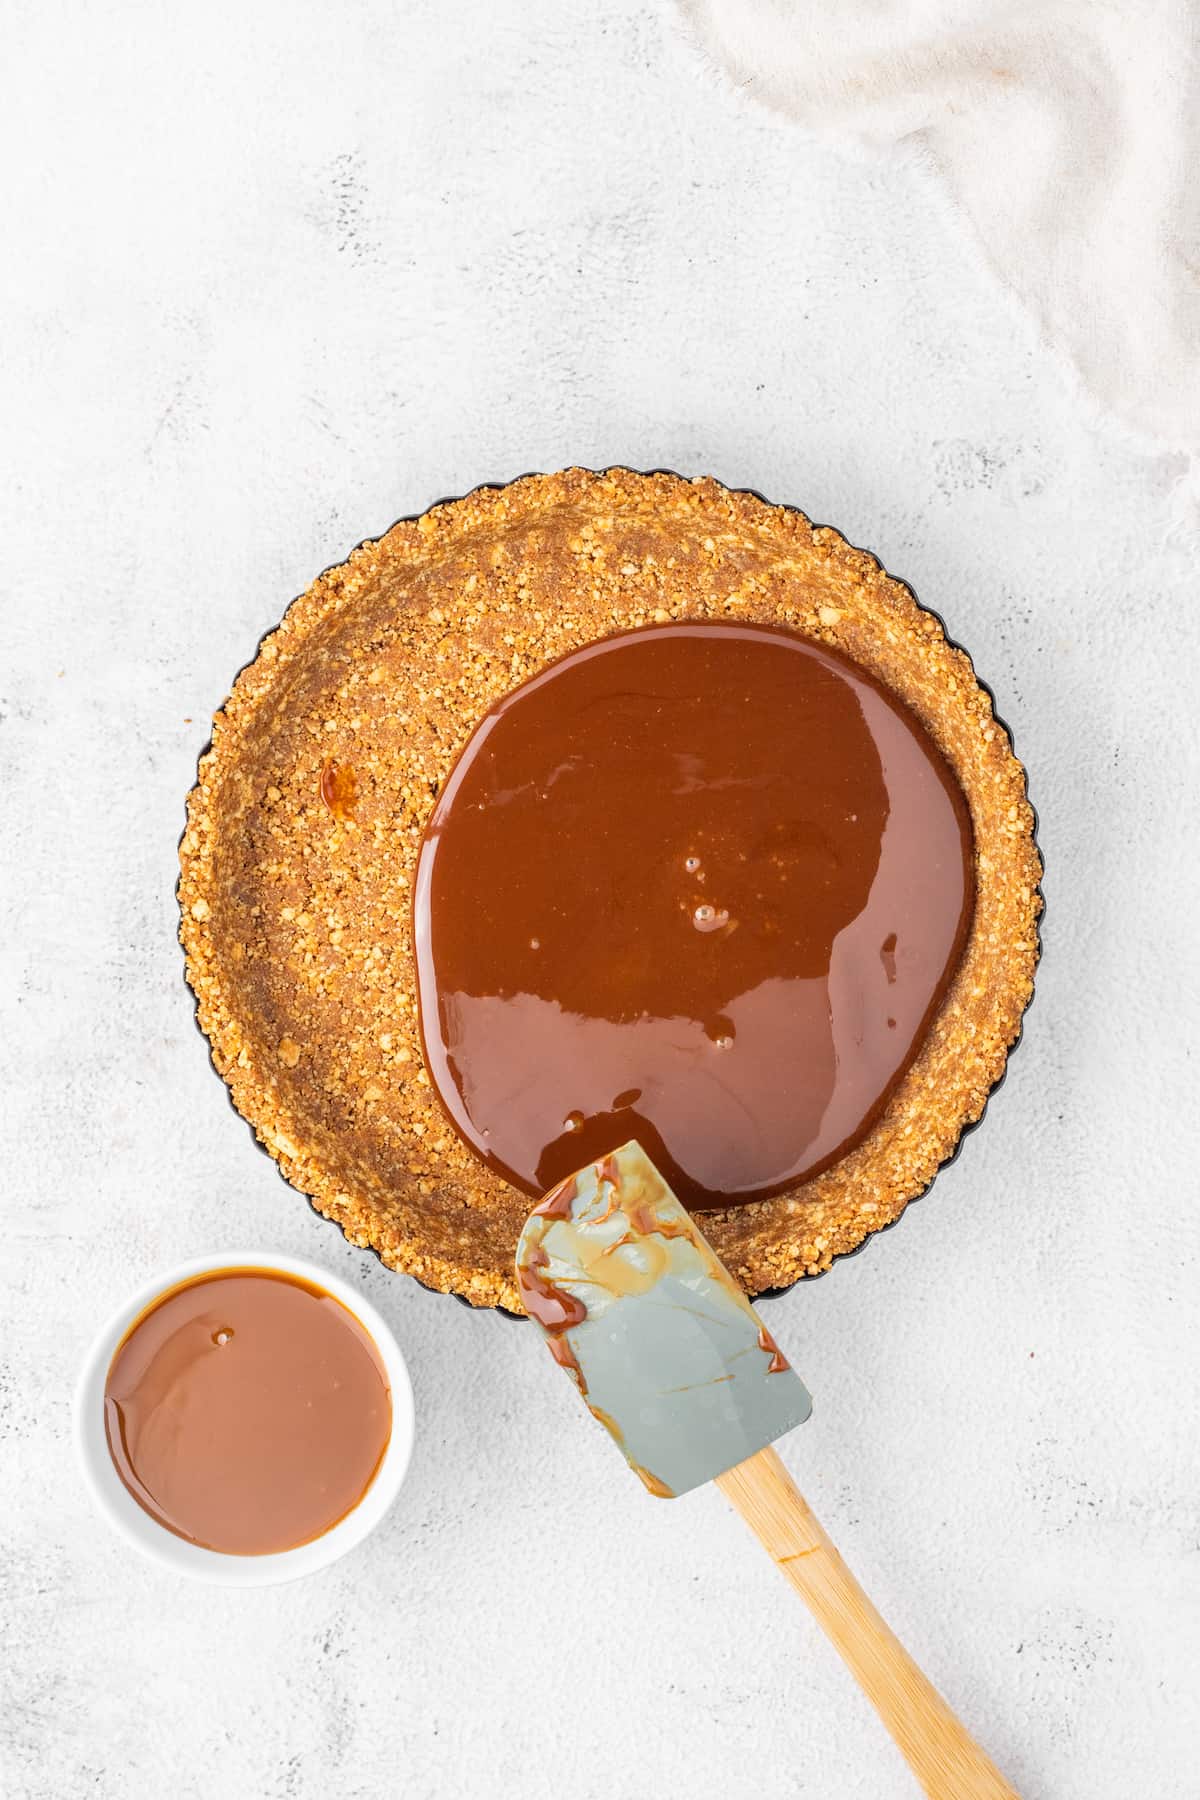 A delightful gingerbread chocolate tart drizzled with rich caramel sauce, accompanied by a handy spoon for easy enjoyment.